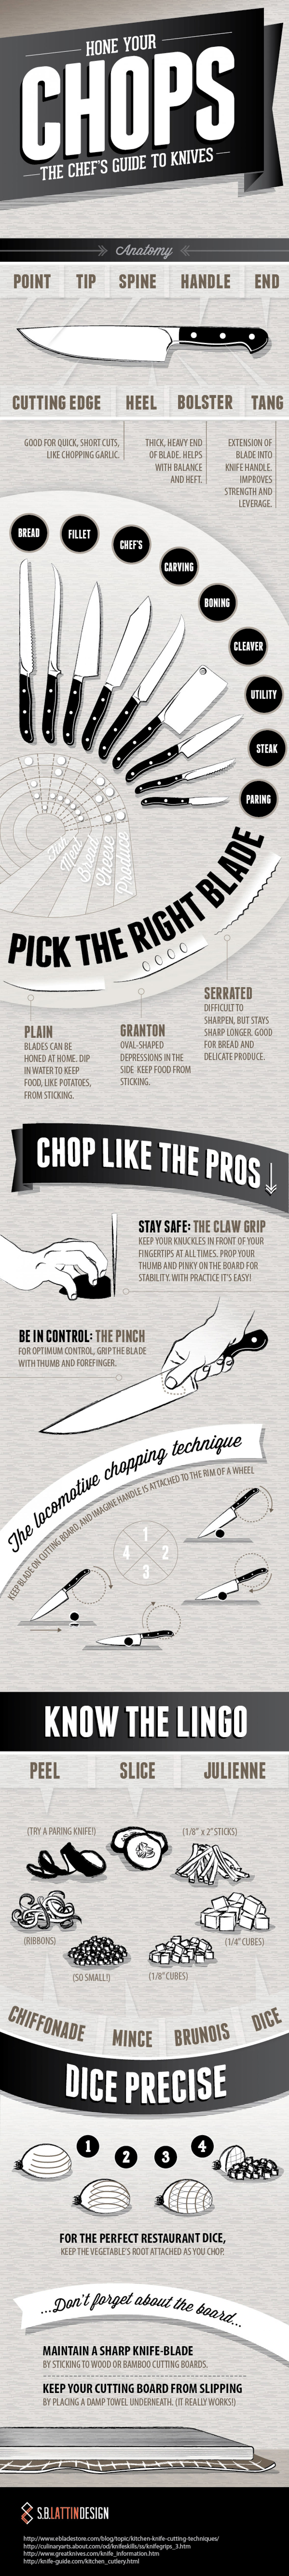 Chefs Guide to Kitchen Knives Infographic